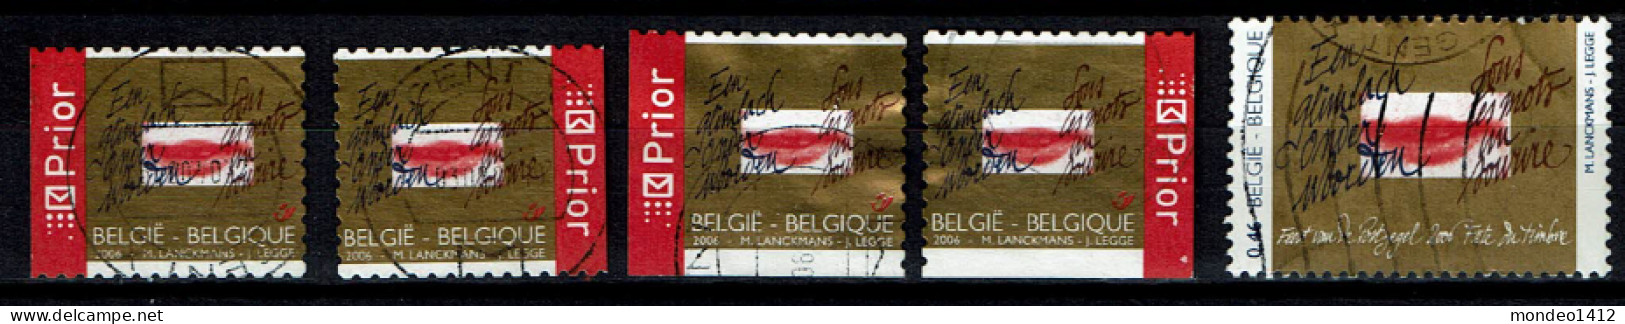 België OBP 3498/3499 - Day Of The Stamp - Gebraucht